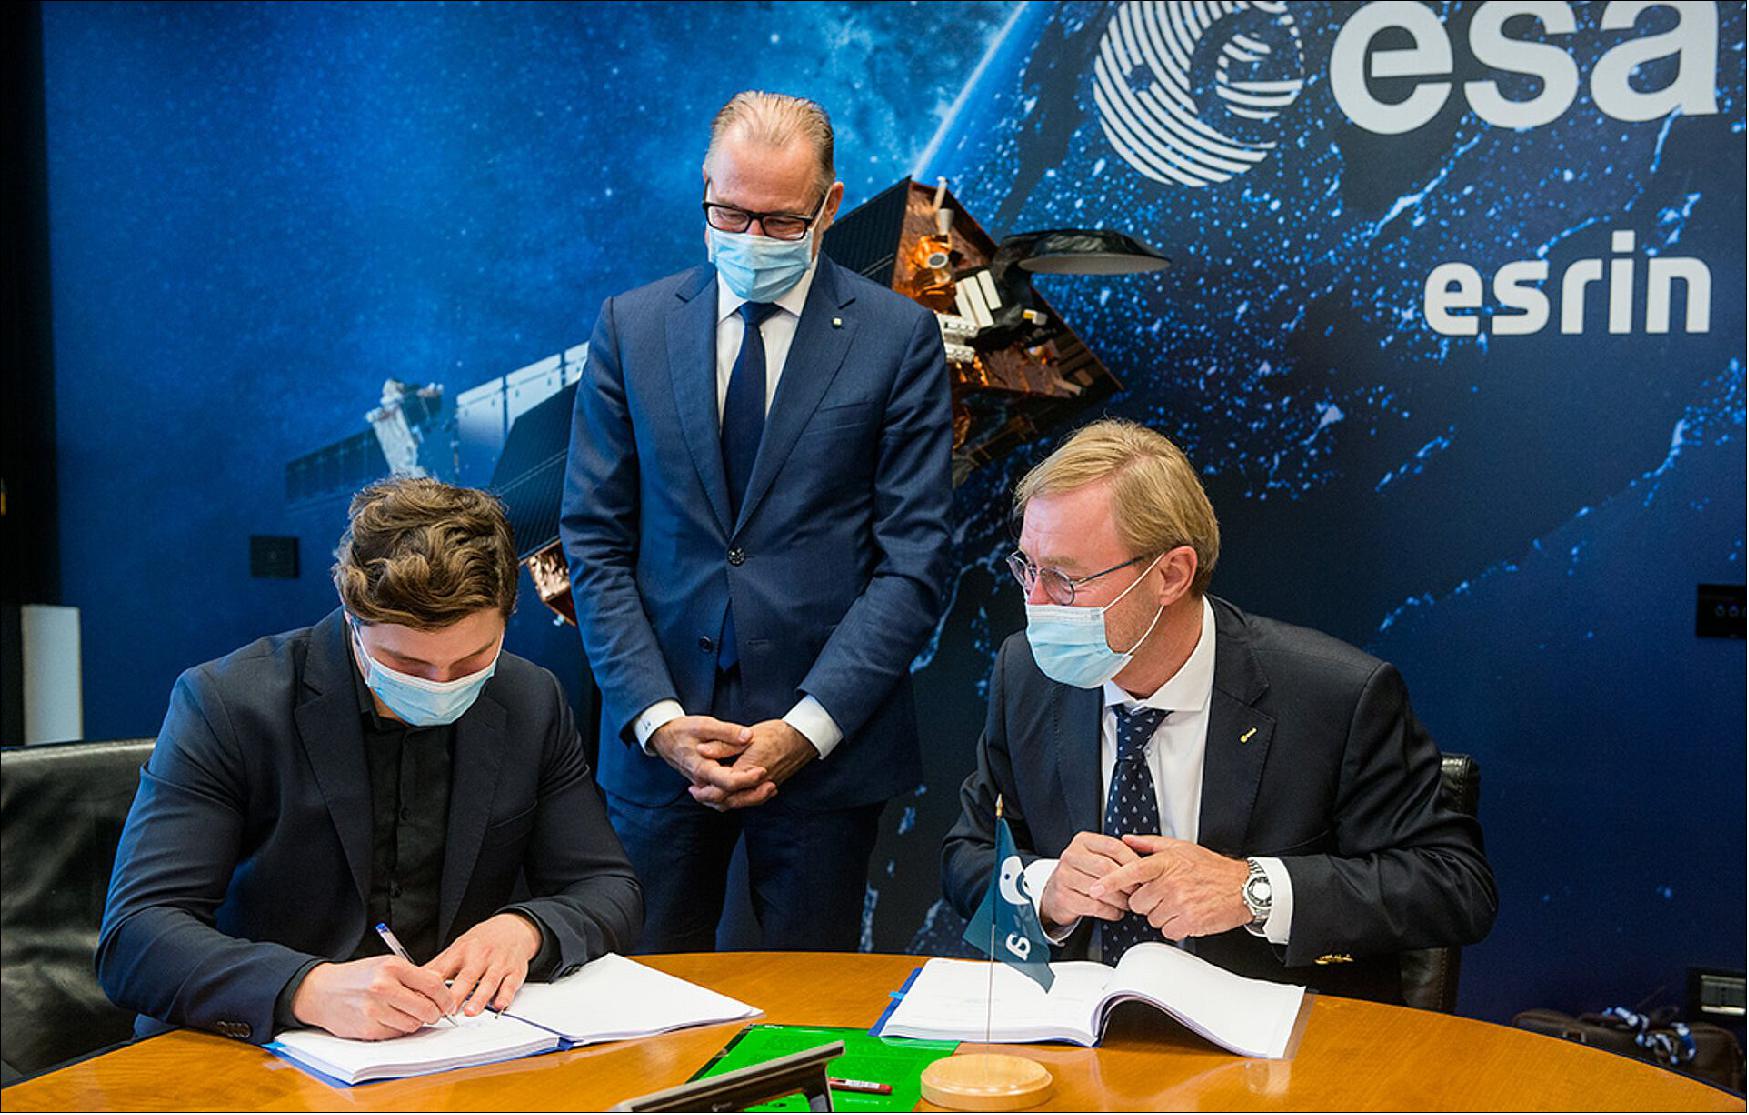 Figure 21: Signing up ICEYE to Copernicus. ESA has signed a contract that brings the ICEYE constellation of small satellites into the fleet of missions contributing to Europe’s Copernicus environmental monitoring program. As a commercial provider of satellite radar imagery, ICEYE is a perfect example of European New Space being implemented within Copernicus. The contract was signed by ESA’s Acting Director of Earth Observation Programs, Toni Tolker-Nielsen (right) and CEO of ICEYE, Rafal Modrzewski (left), in the presence of ESA’s Director General, Josef Aschbacher (image credit: ESA, V. Stefanelli)